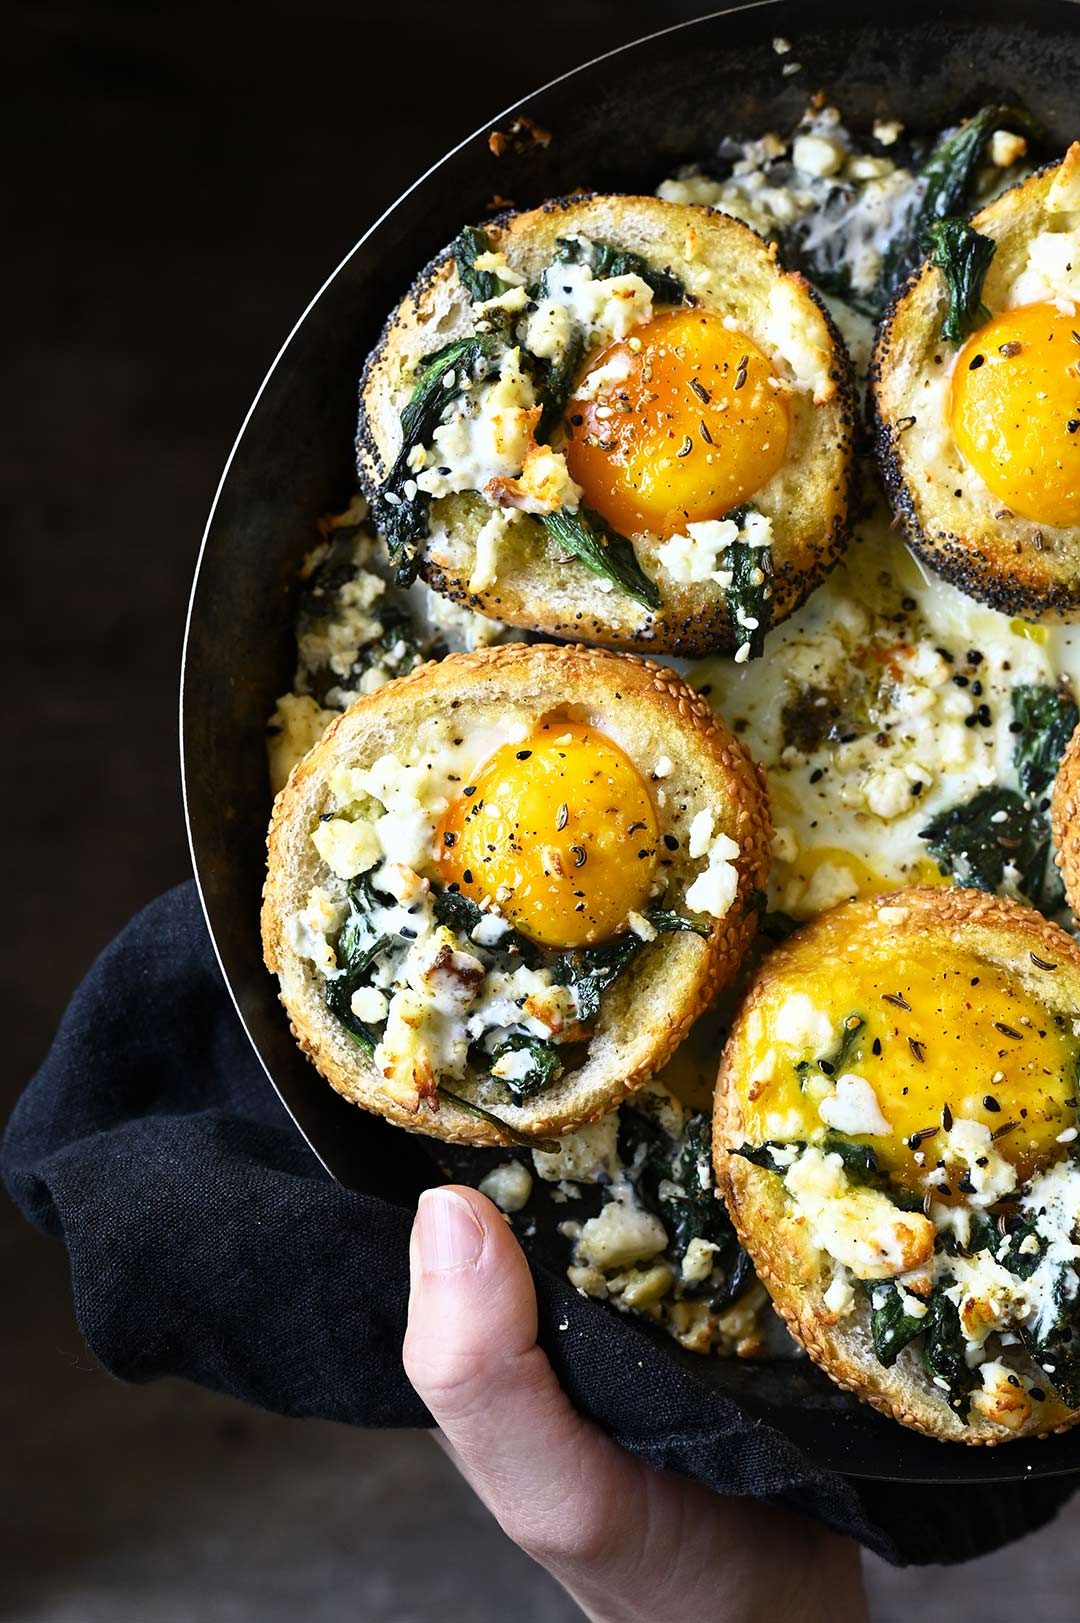 serving dumplings |Baked za'atar egg buns with spinach and feta